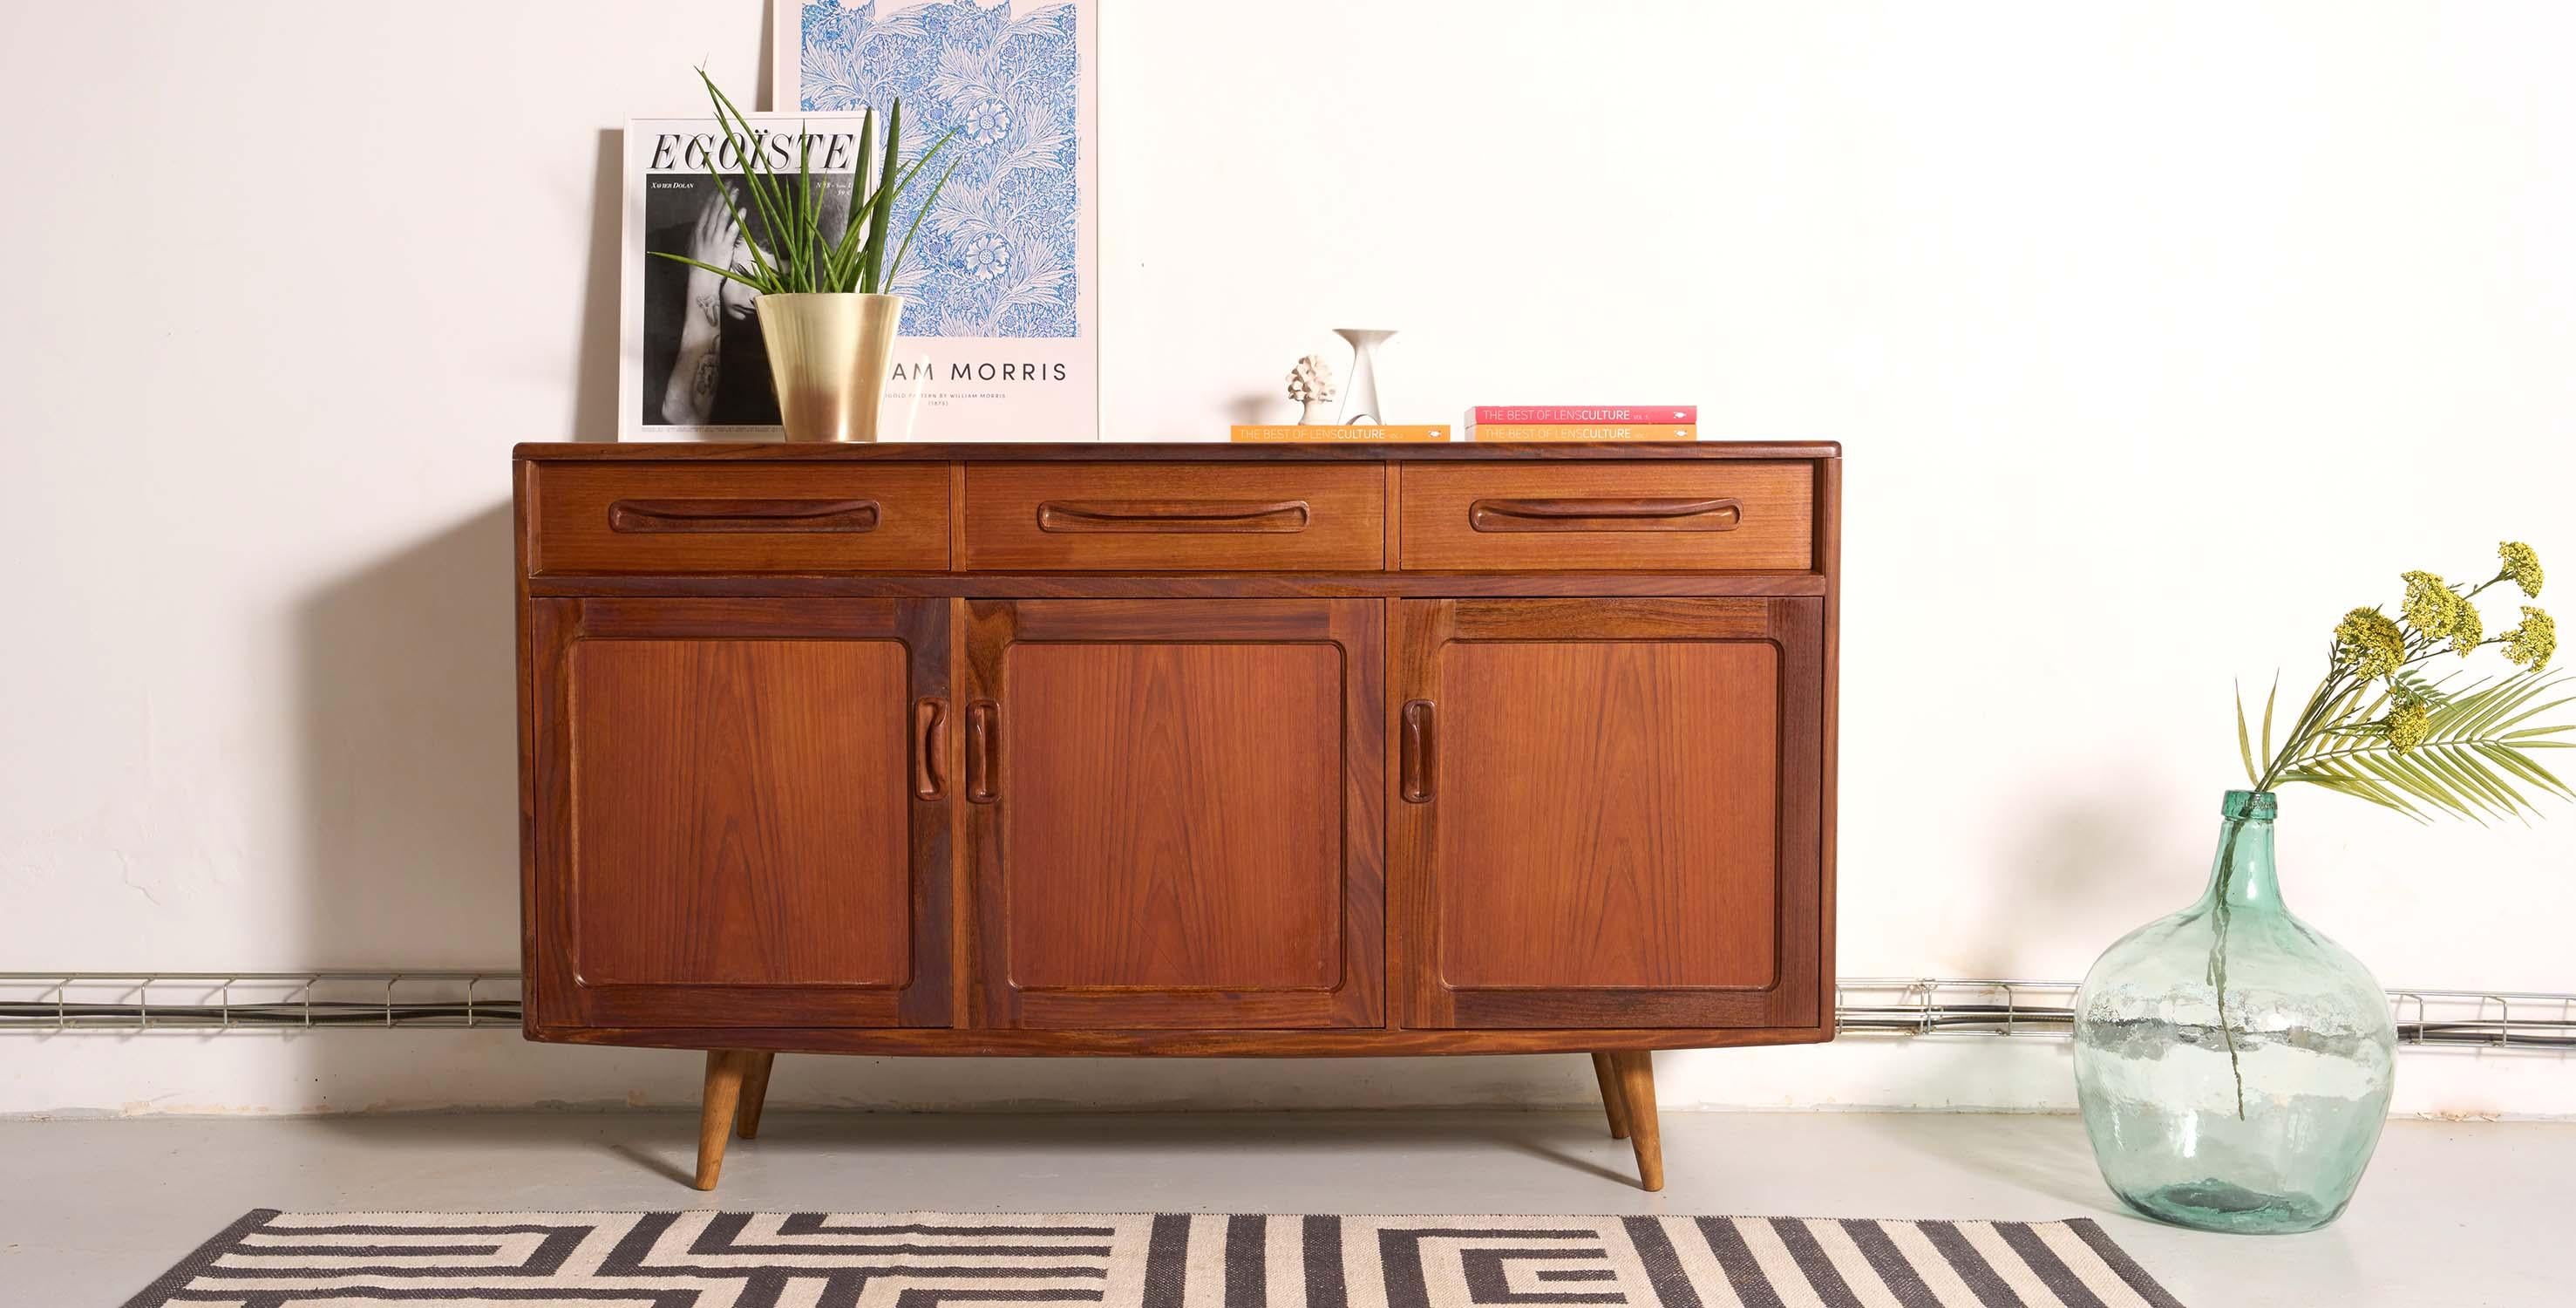 Vintage G Plan sideboard with compass legs (Fresco range), Scandinavian style from the 1970s-80s.
This vintage sideboard can be placed in the bedroom, the living room or the kitchen, where it will make a perfect china cabinet.
Its length of 141.5cm,